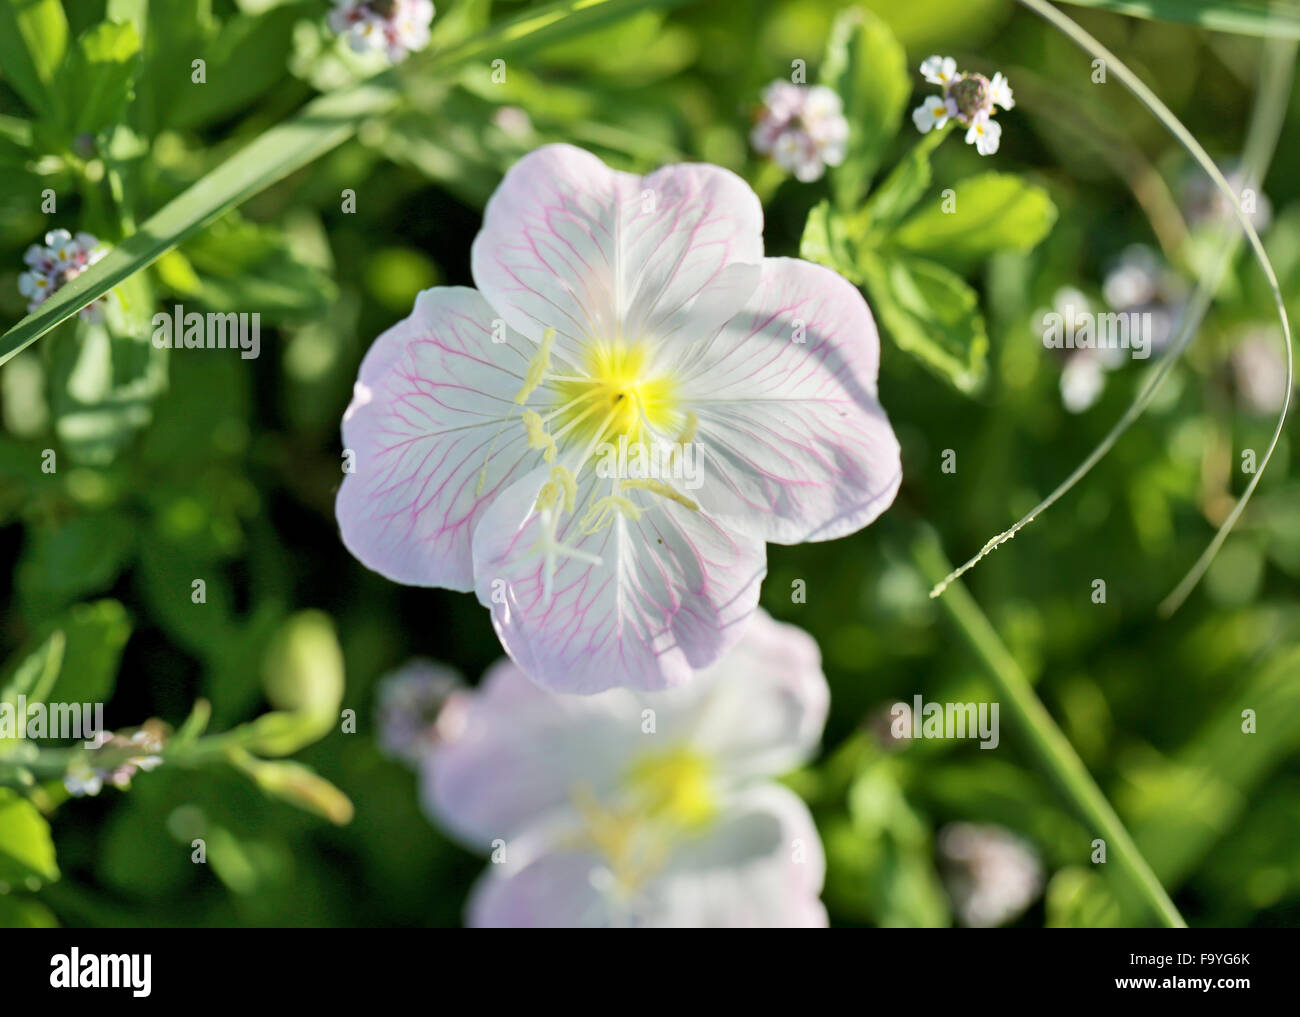 Beautiful bright white flower photographed close up Stock Photo